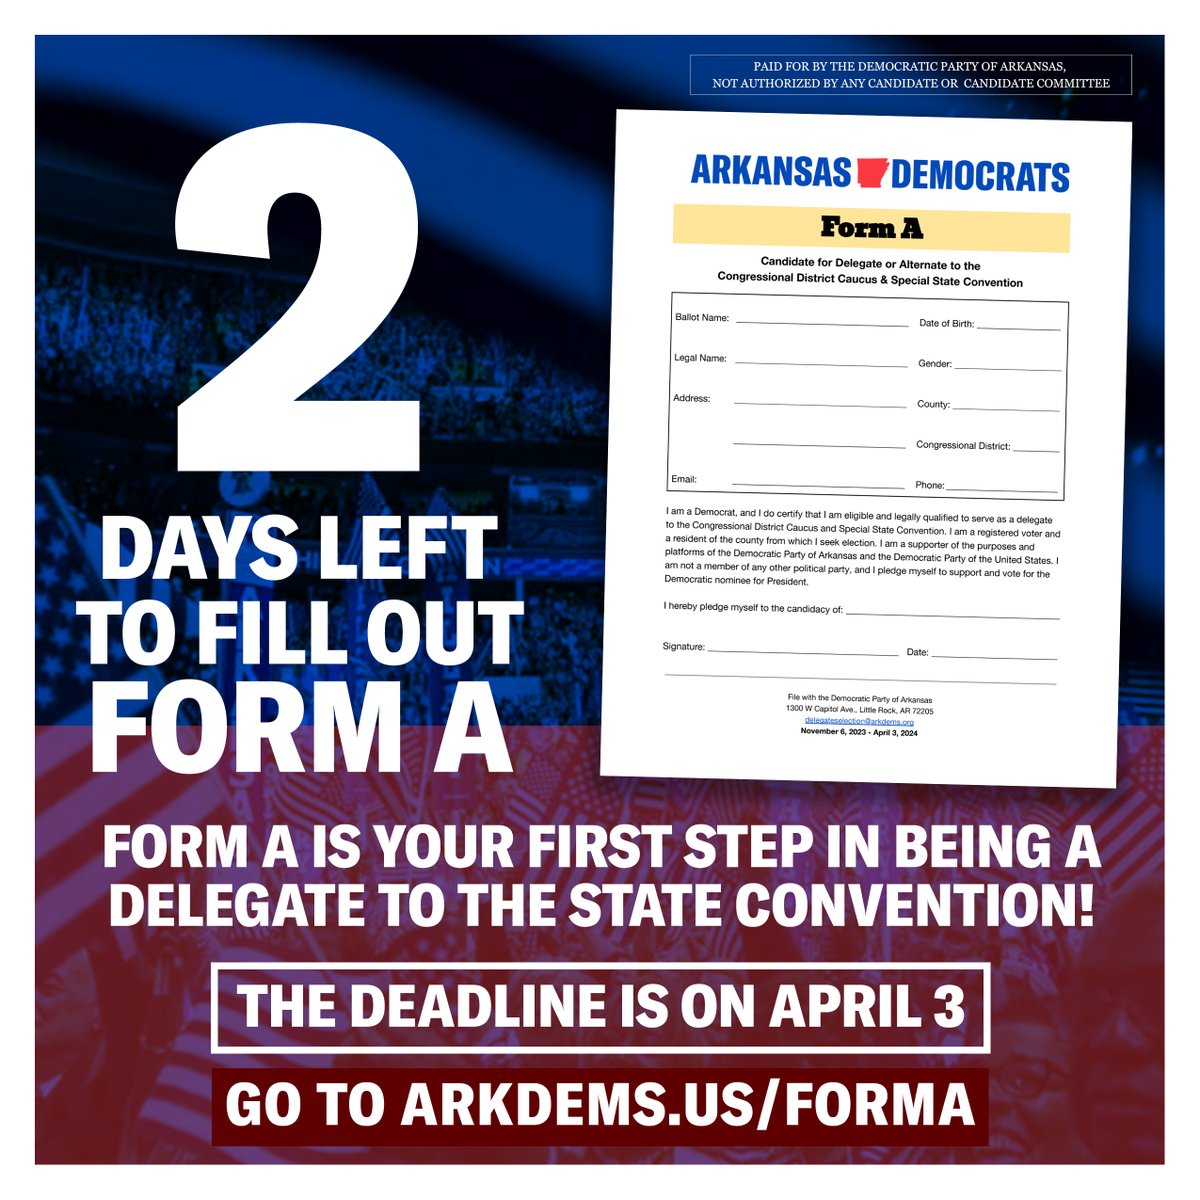 📢📢 ARKANSAS DEMOCRATS ‼️ ⏰⏰ ONLY TWO DAYS LEFT ‼️ Do your part to re-elect @POTUS & @VP! Time is running out to complete Form A to ensure you are a voting member at the Arkansas Special State Convention! It will take fewer than 5 minutes: arkdems.us/FormA